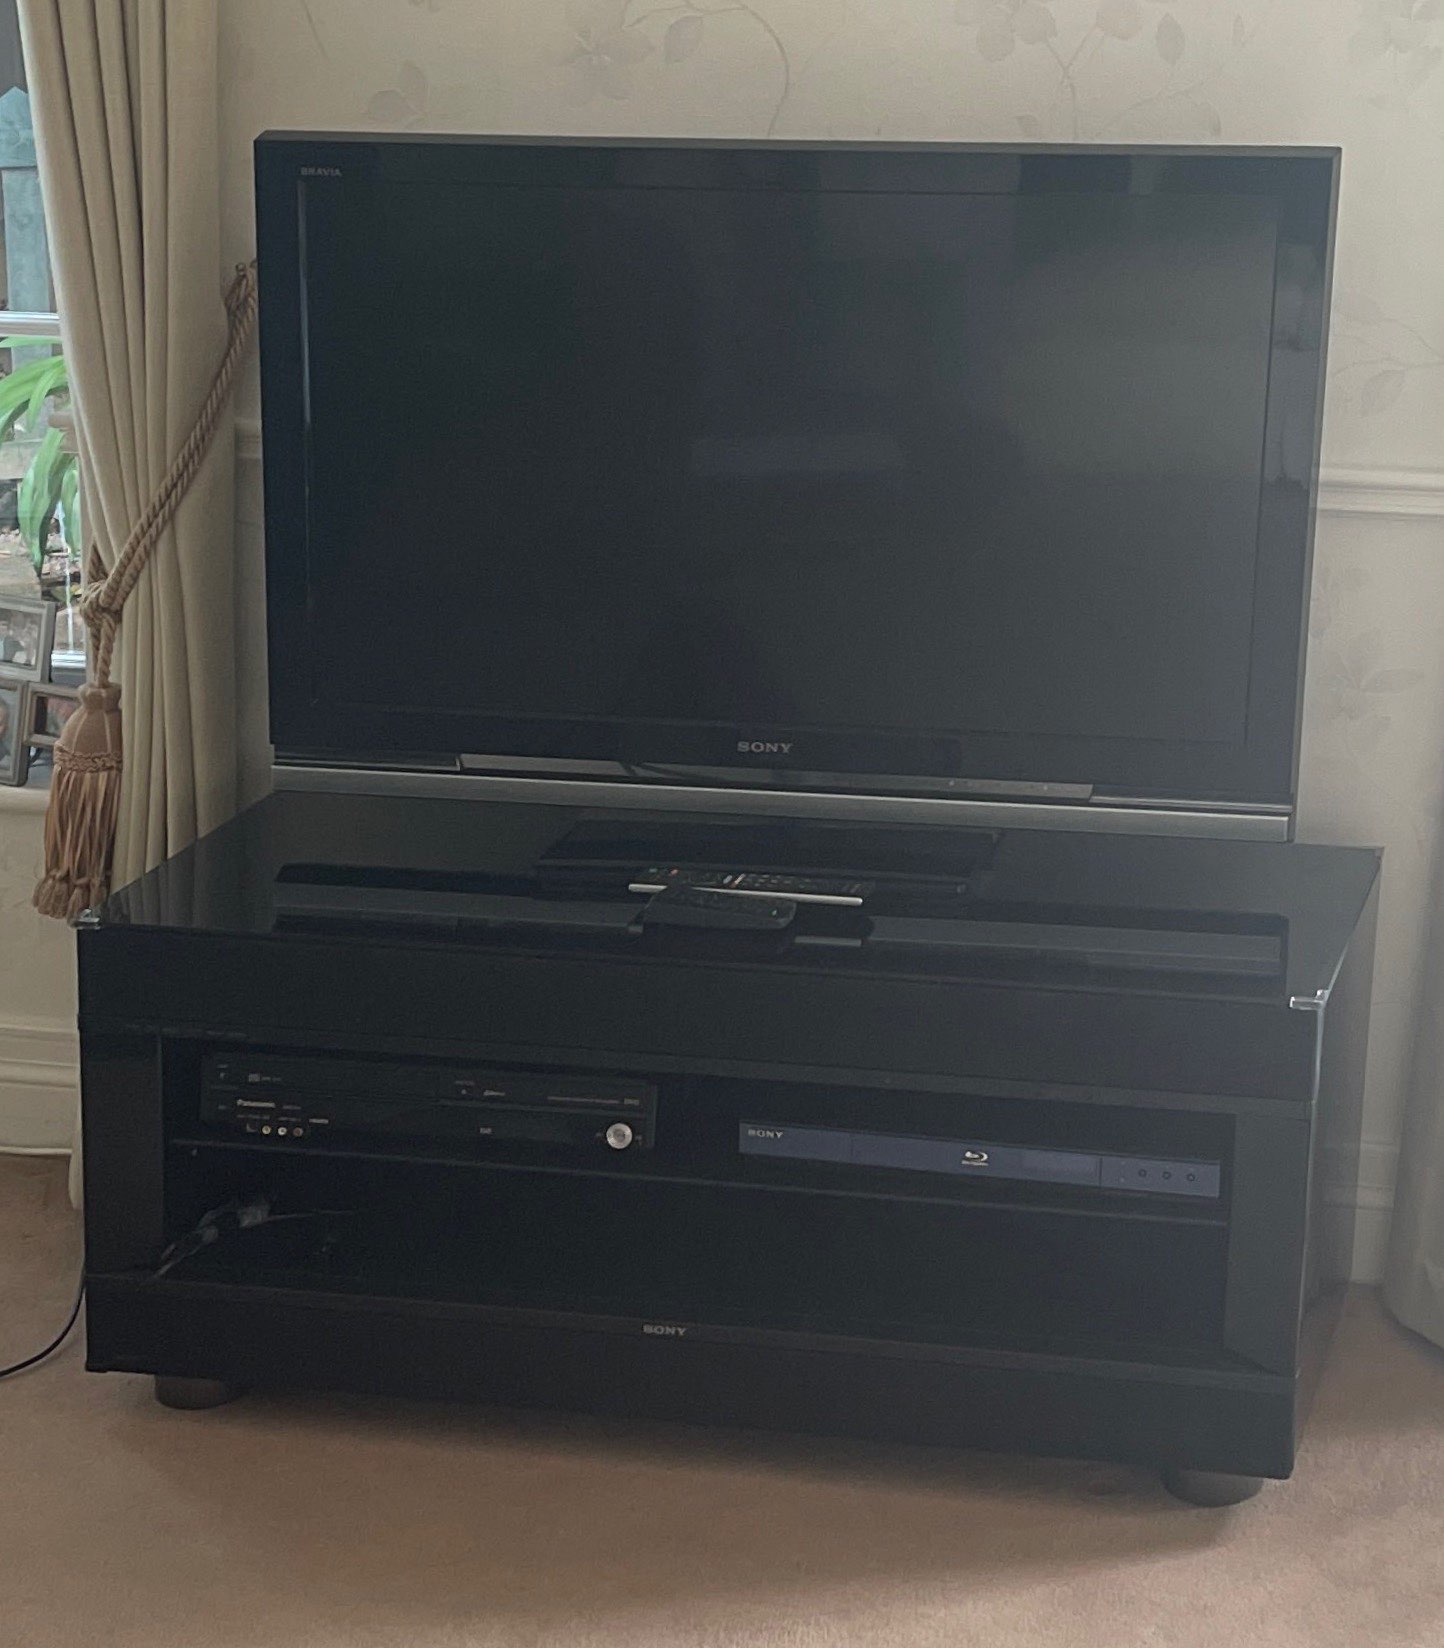 A Sony 42in flat screen television with a Sony Blu Ray disk player, Panasonic DVD player and stand